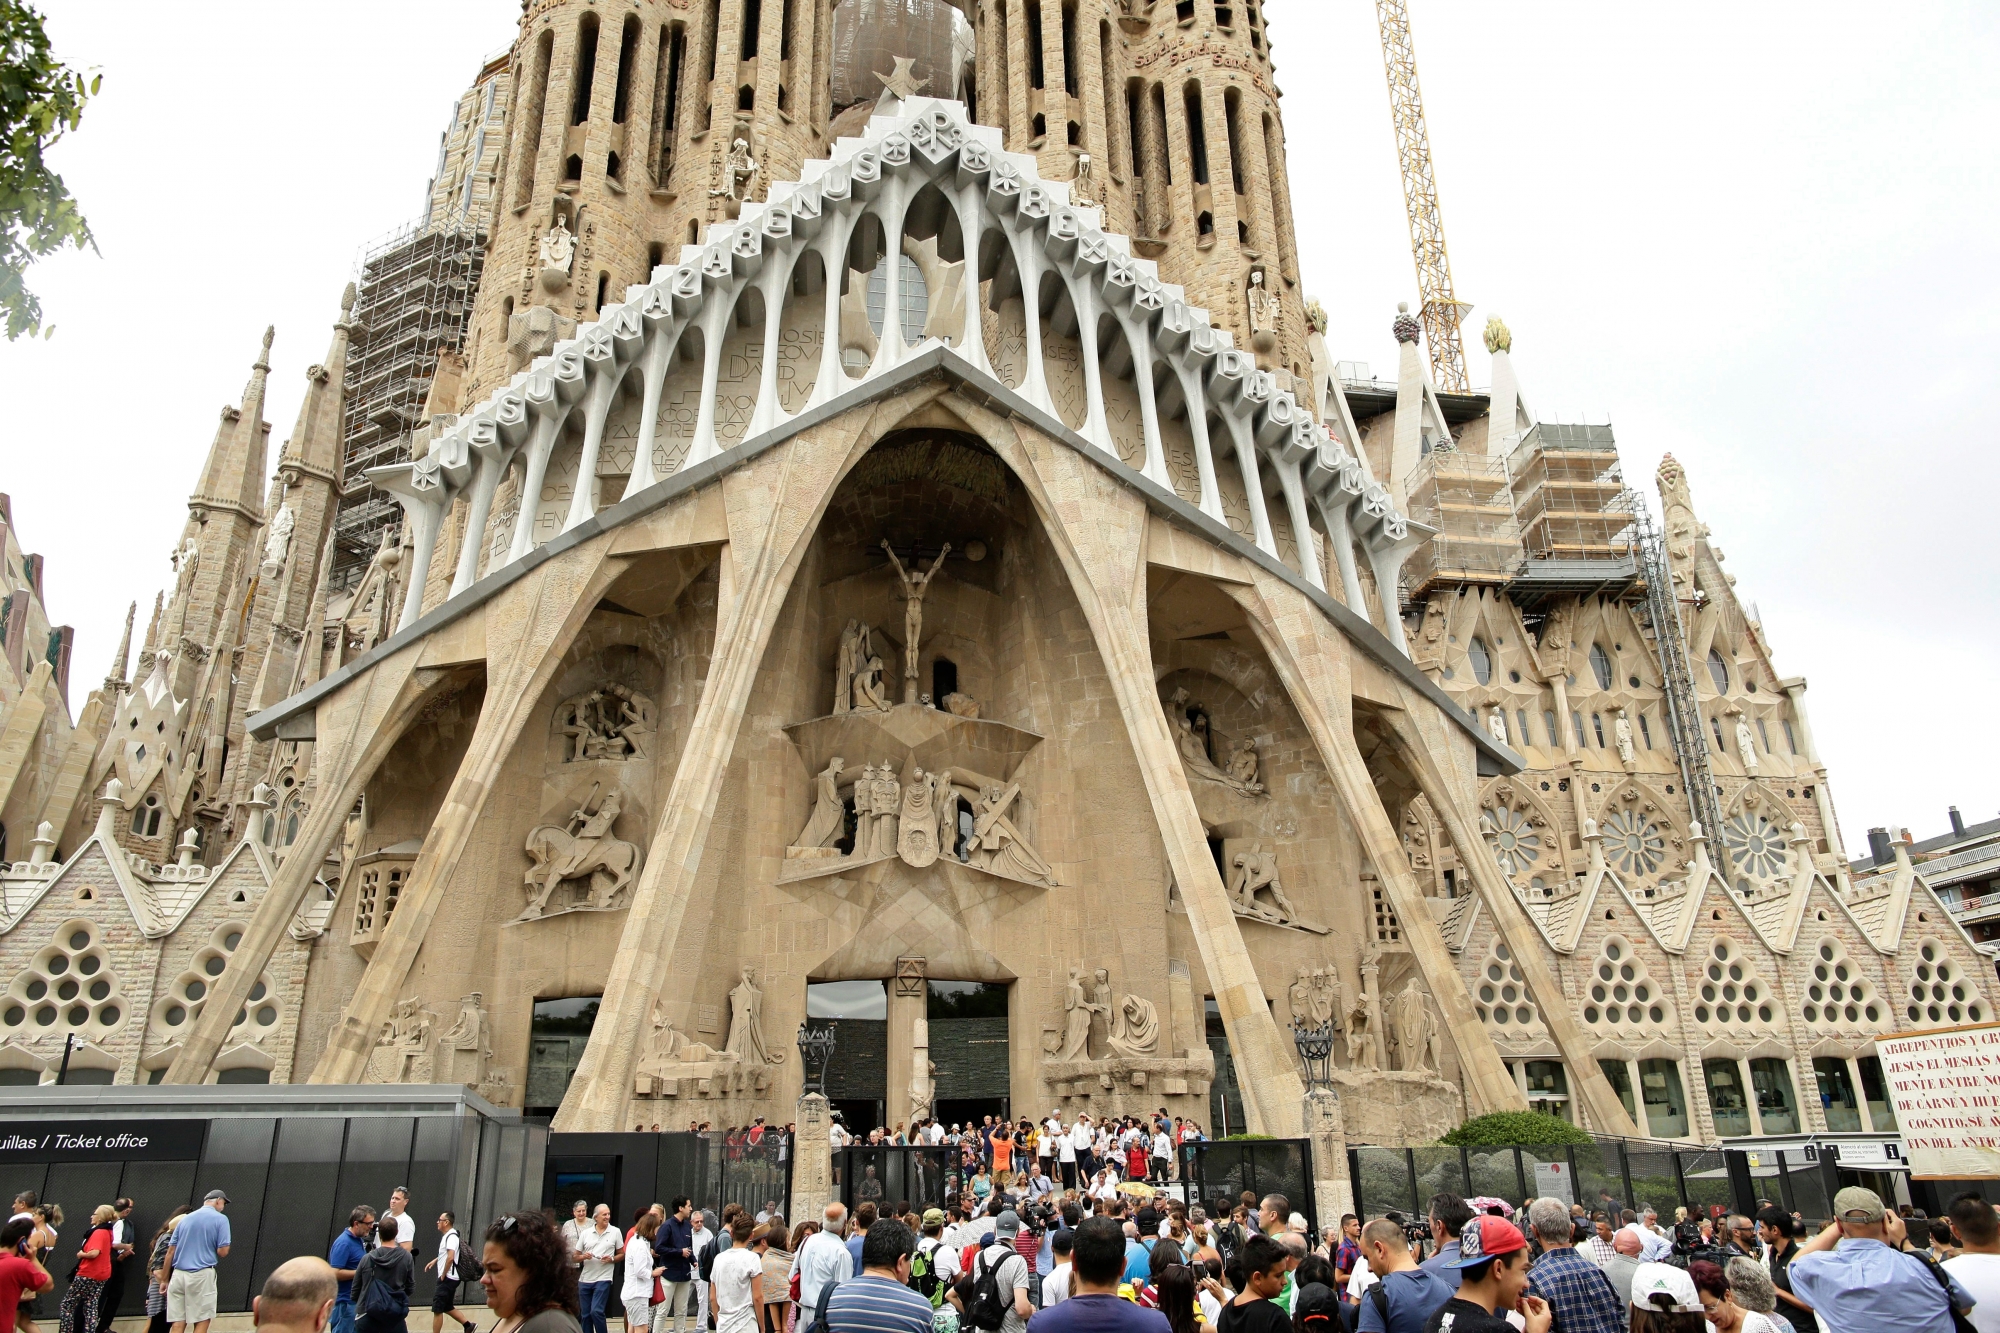 Dignitaries leave after a solemn Mass at Barcelona's Sagrada Familia Basilica for the victims of the terror attacks that killed 14 people and wounded over 120 in Barcelona , Spain, Sunday, Aug. 20, 2017. (AP Photo/Manu Fernandez) Spain Attacks